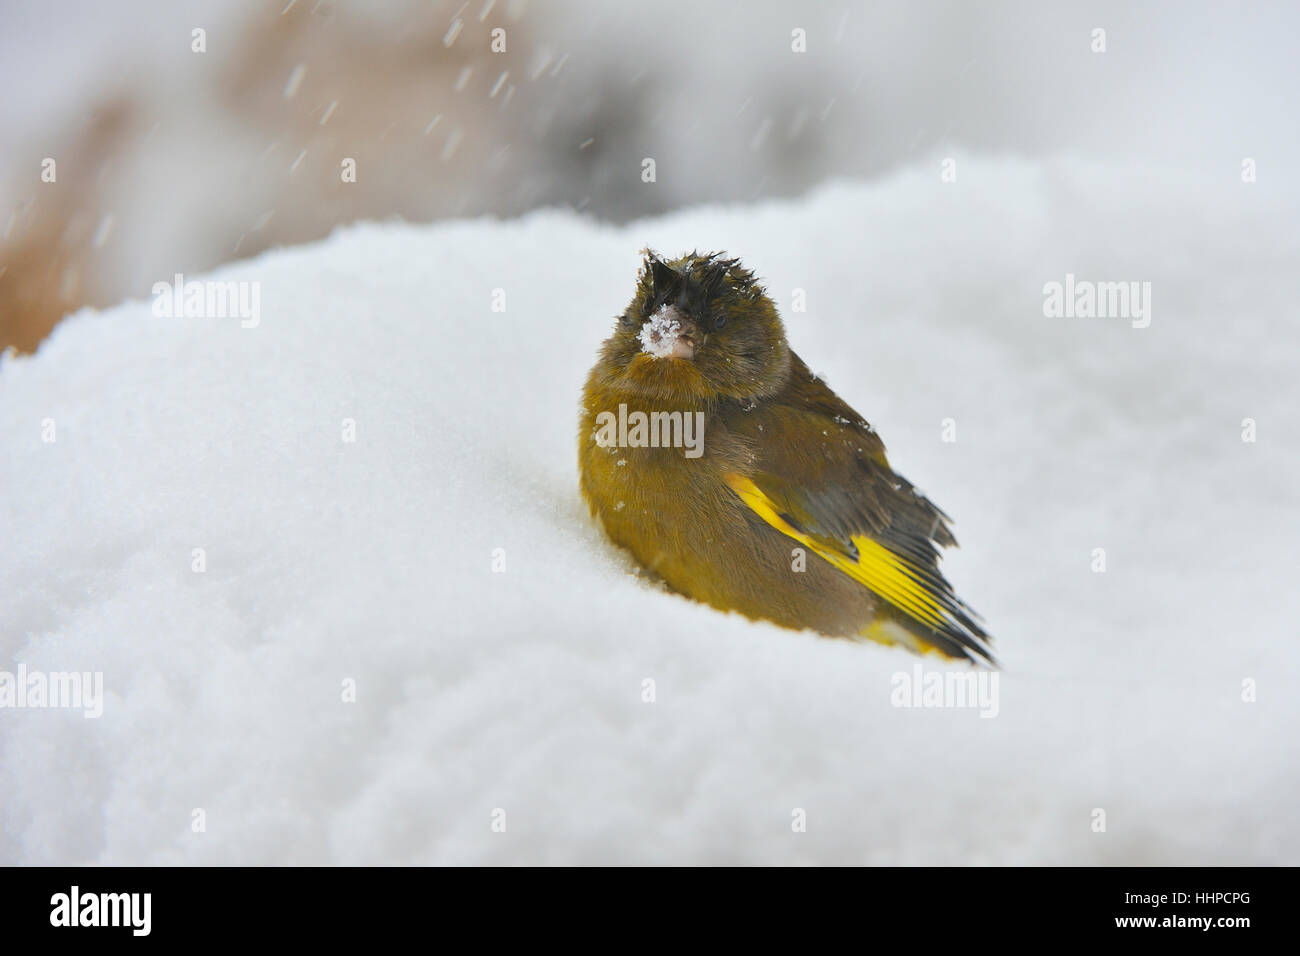 greenfinch Stock Photo